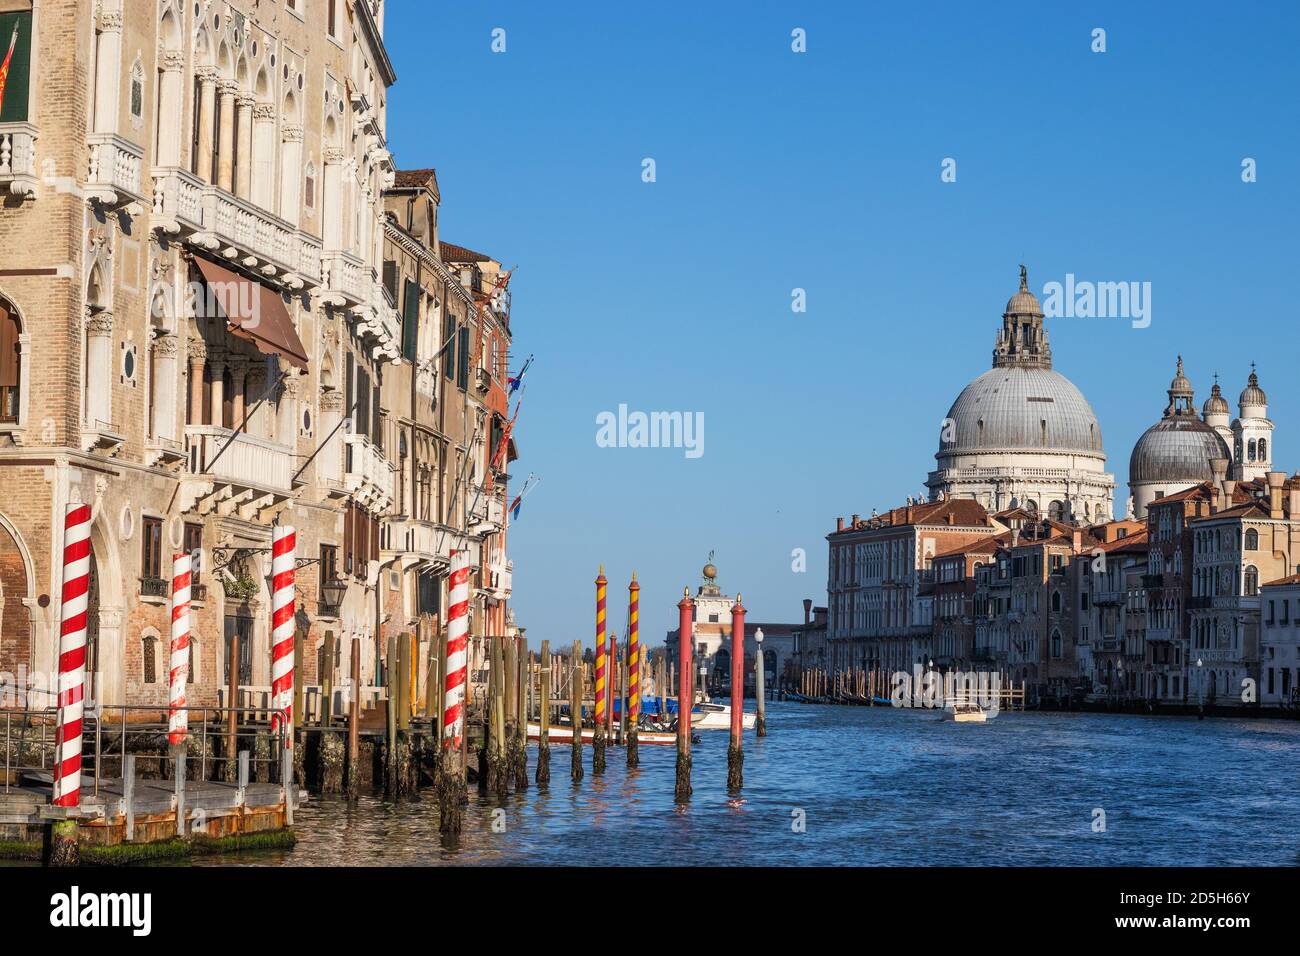 The Basilica di Santa Maria della Salute viewed from the Grand Canal on a sunny spring afternoon Stock Photo